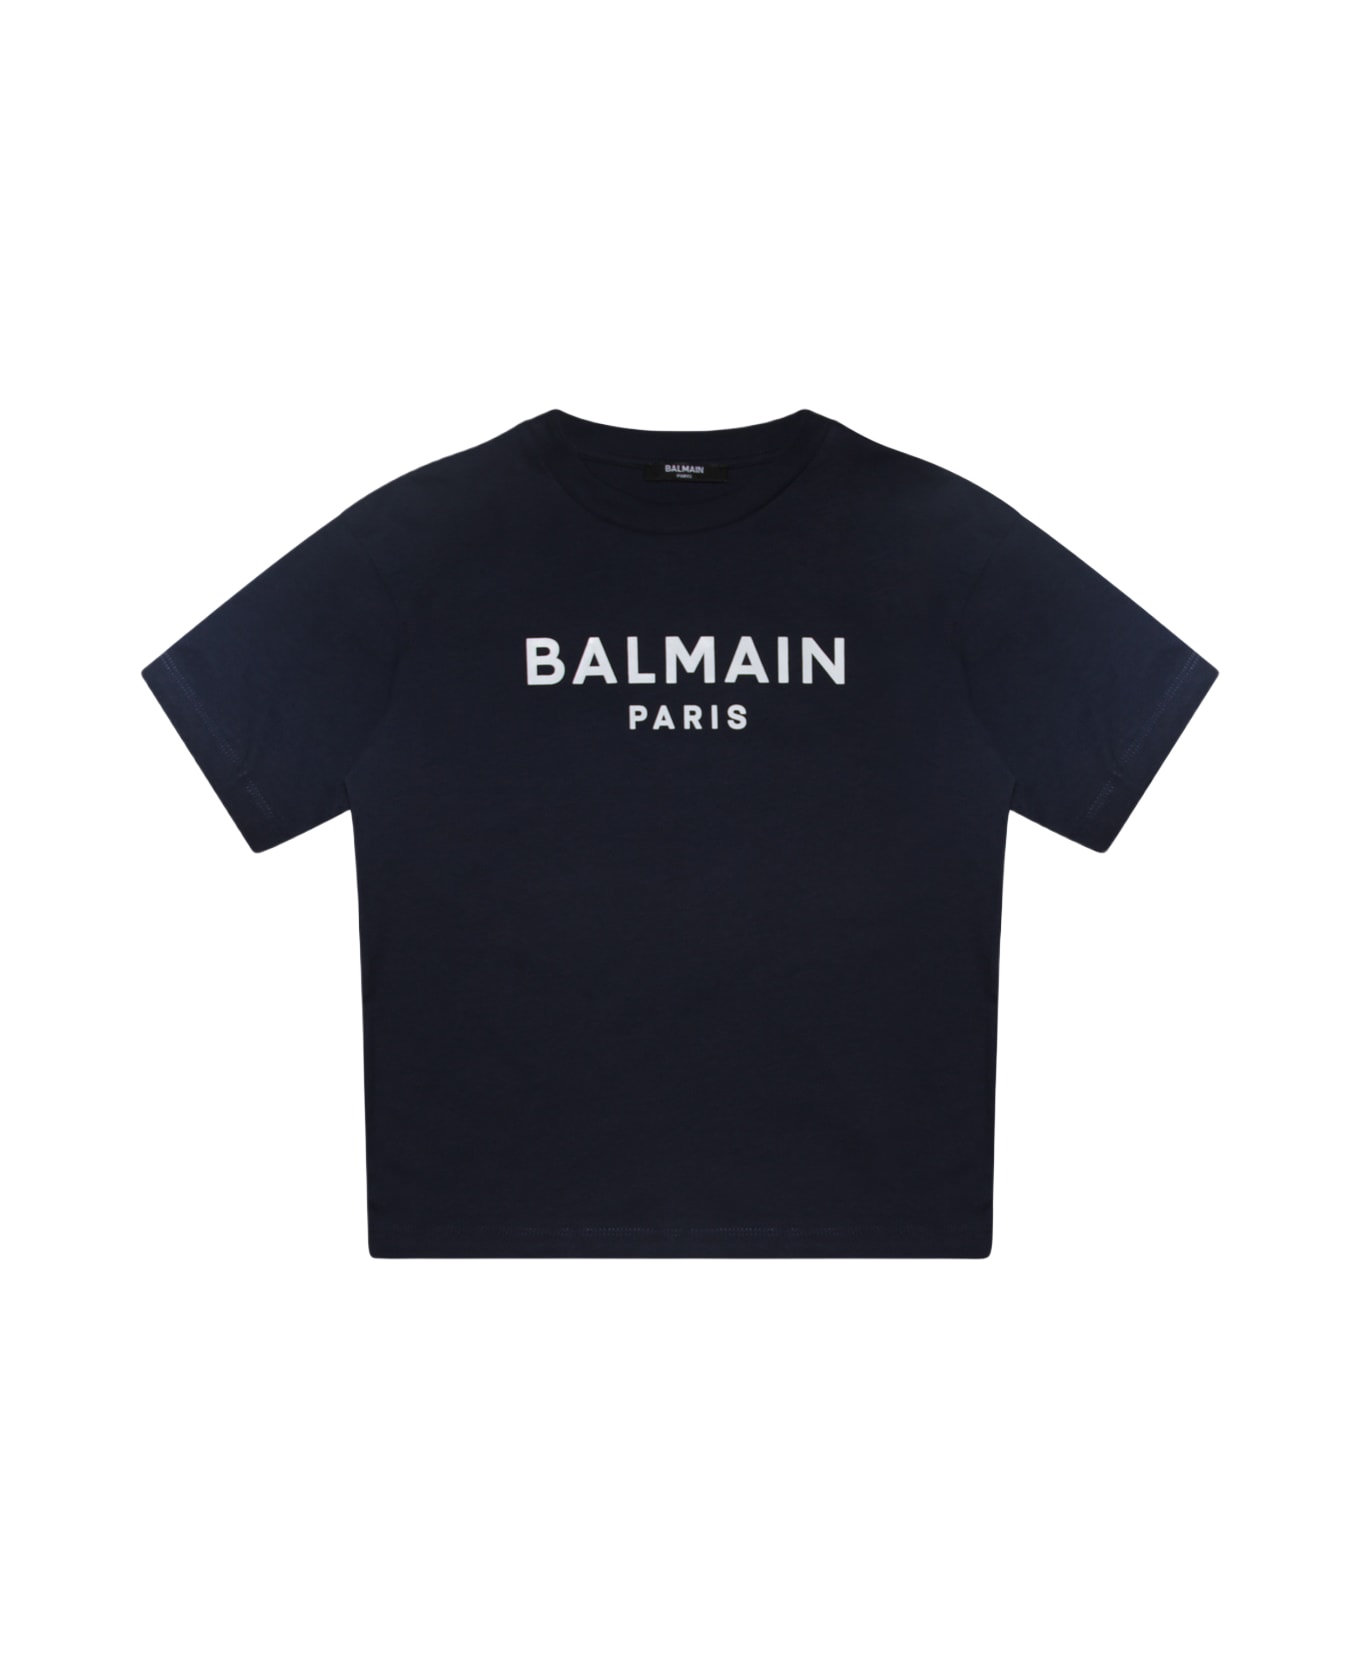 Balmain Navy Blue And White Cotton T-shirt - Slim Fit Velour Polo With Zip Neck